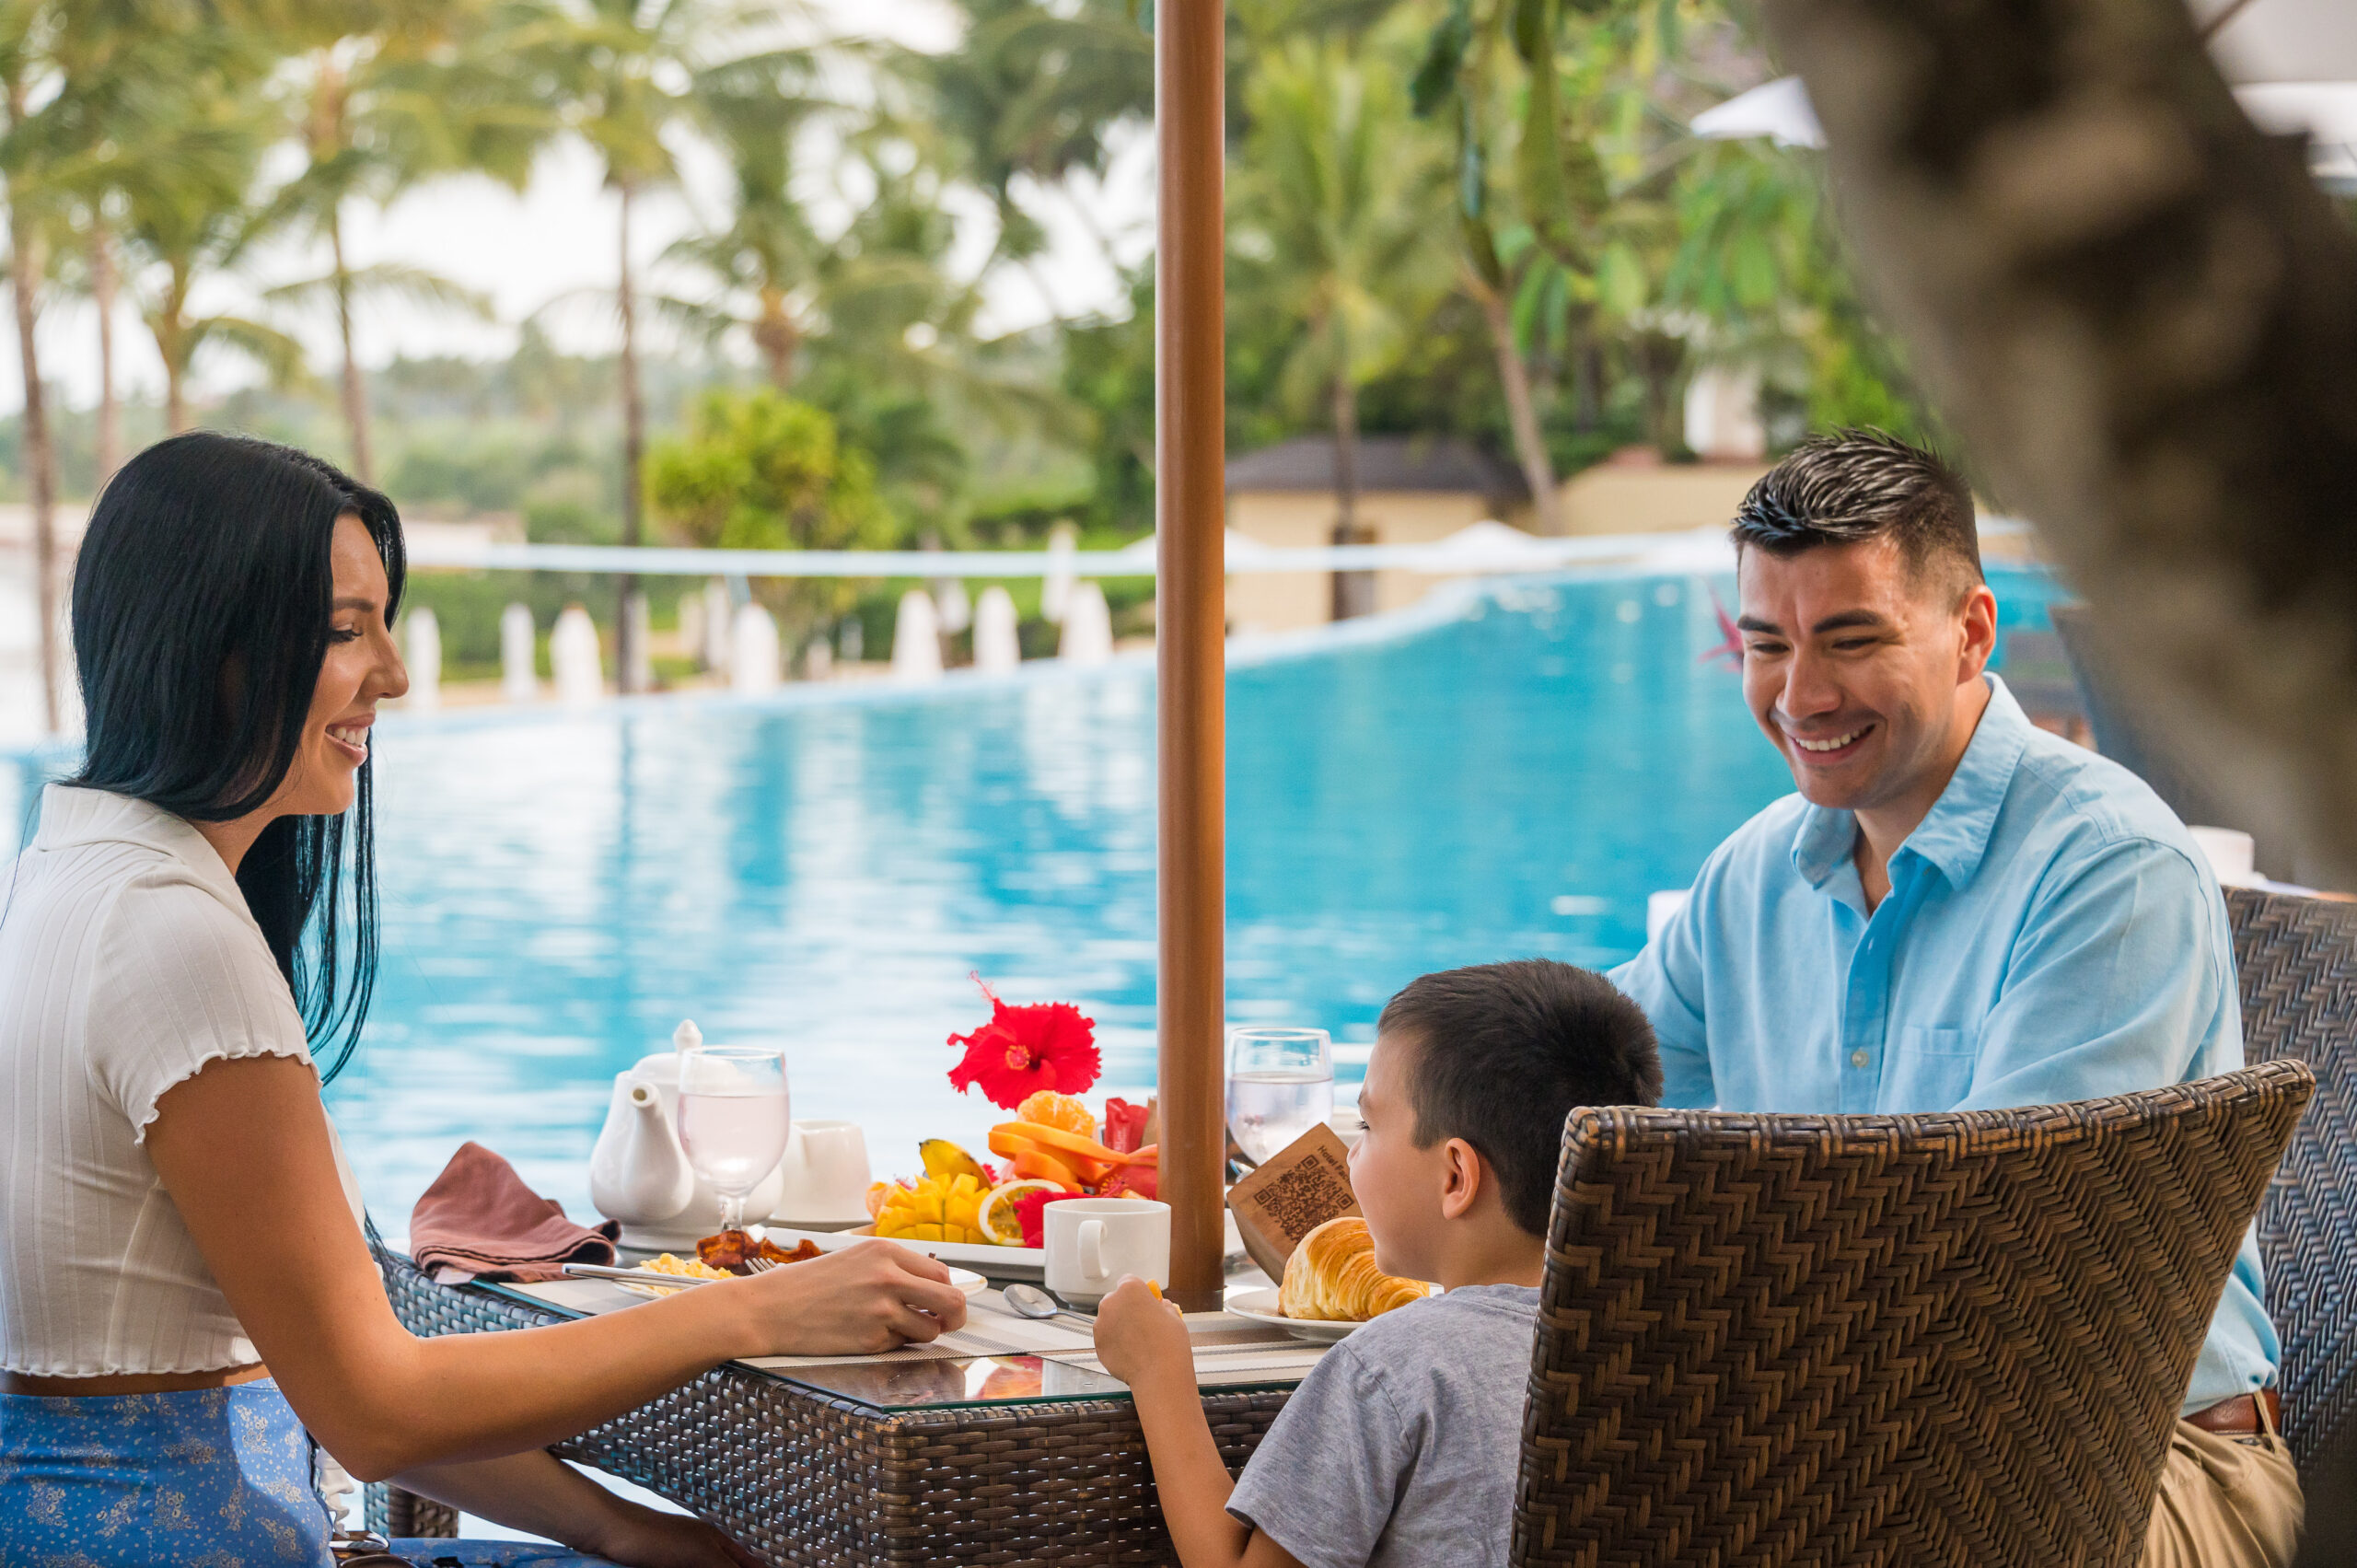 A couple sit with their son eating breakfast outside by a pool